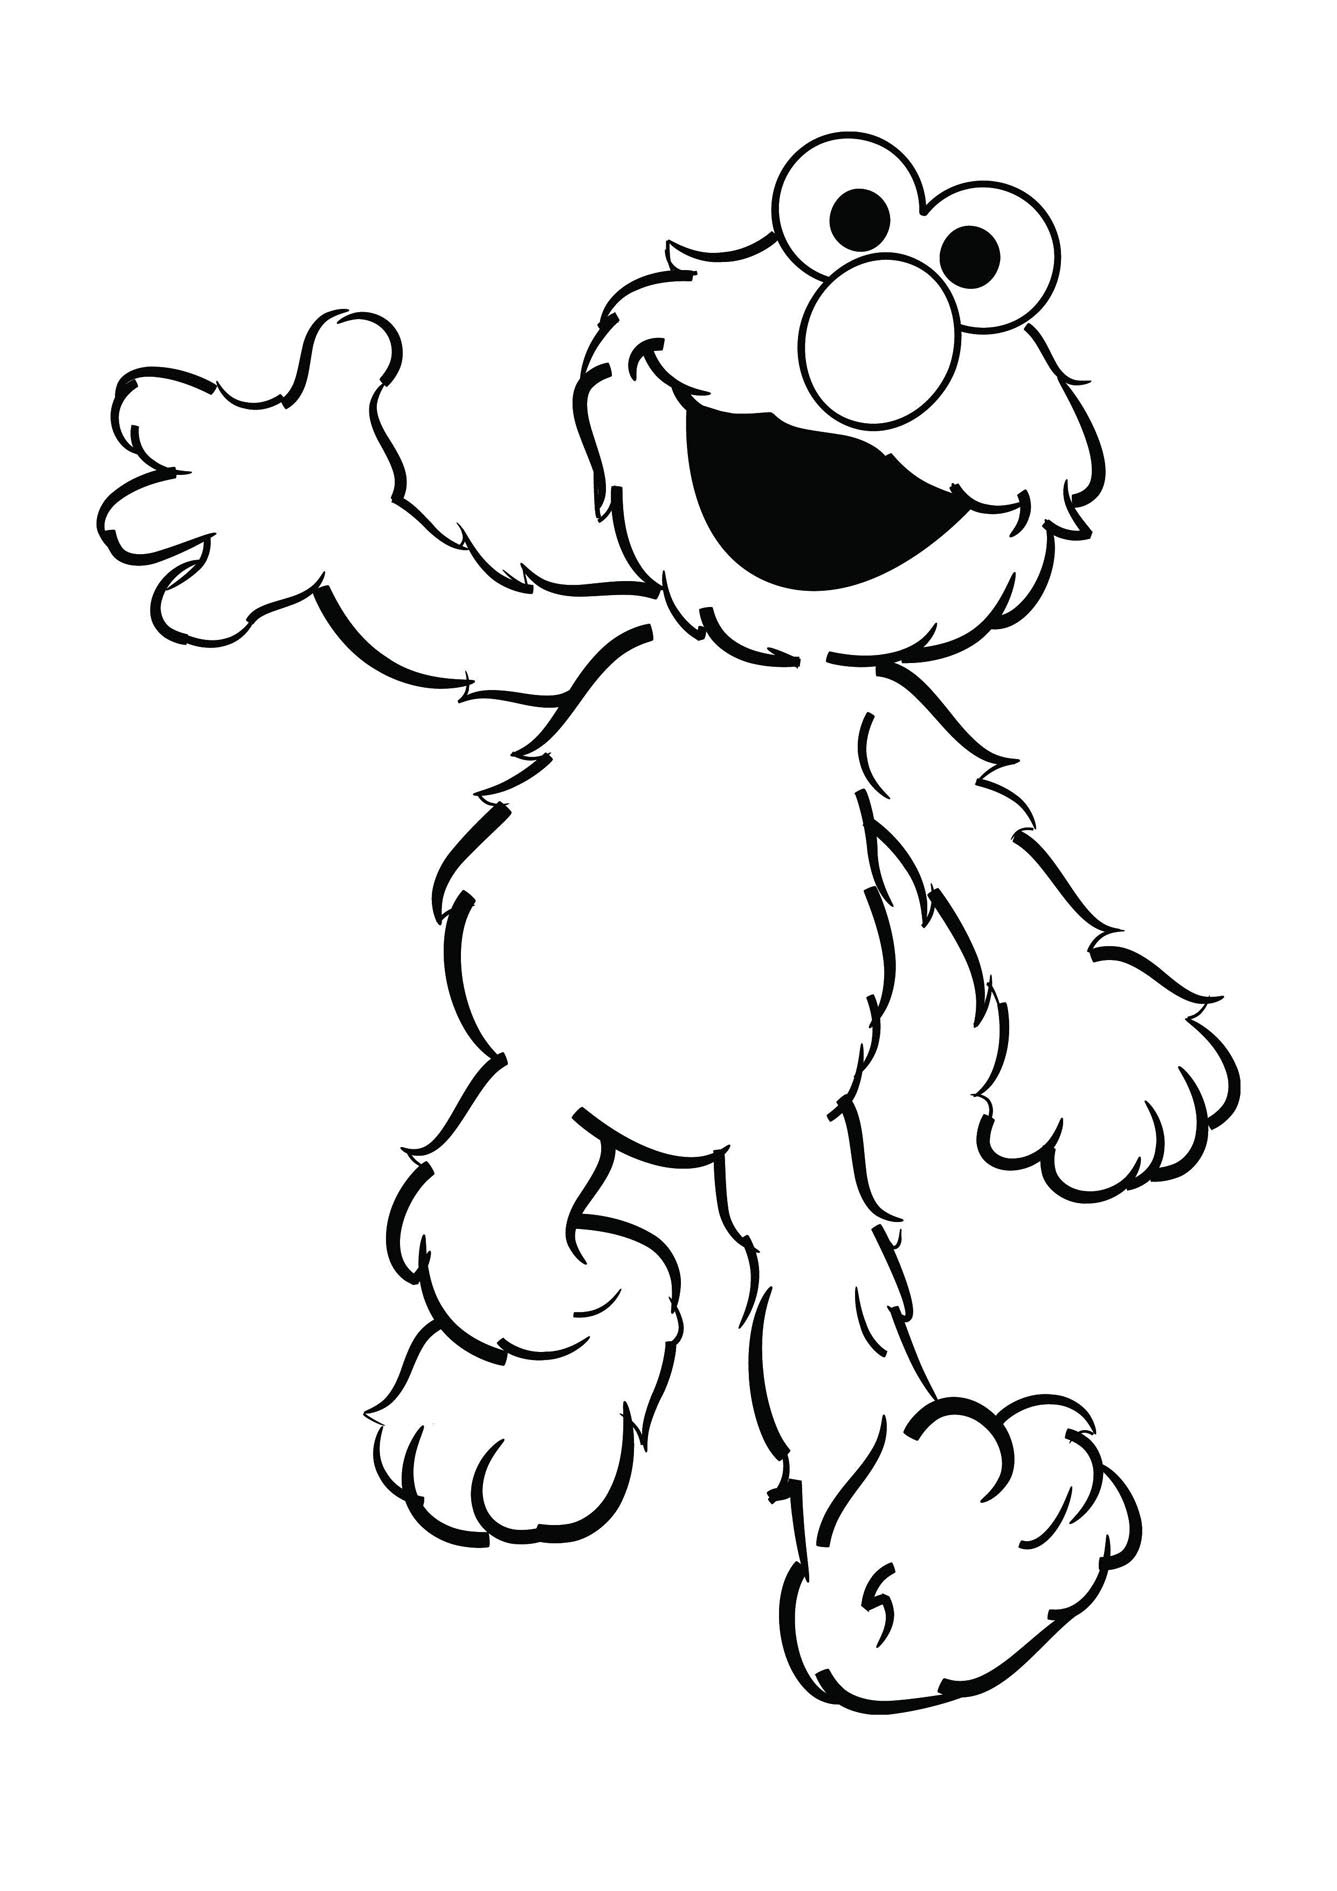 Sesame Street To Print For Free - Sesame Street Kids Coloring Pages - Free Printable Coloring Pages Sesame Street Characters